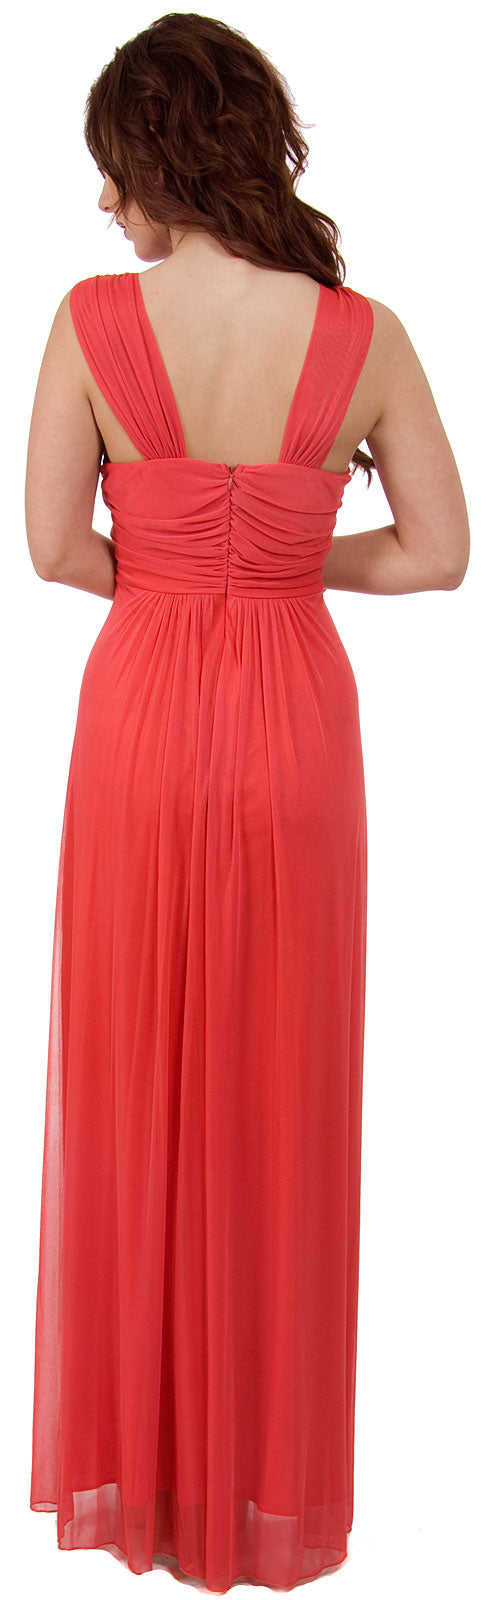 Back image of Braid Accent Ruched Long Formal Bridesmaid Dress 